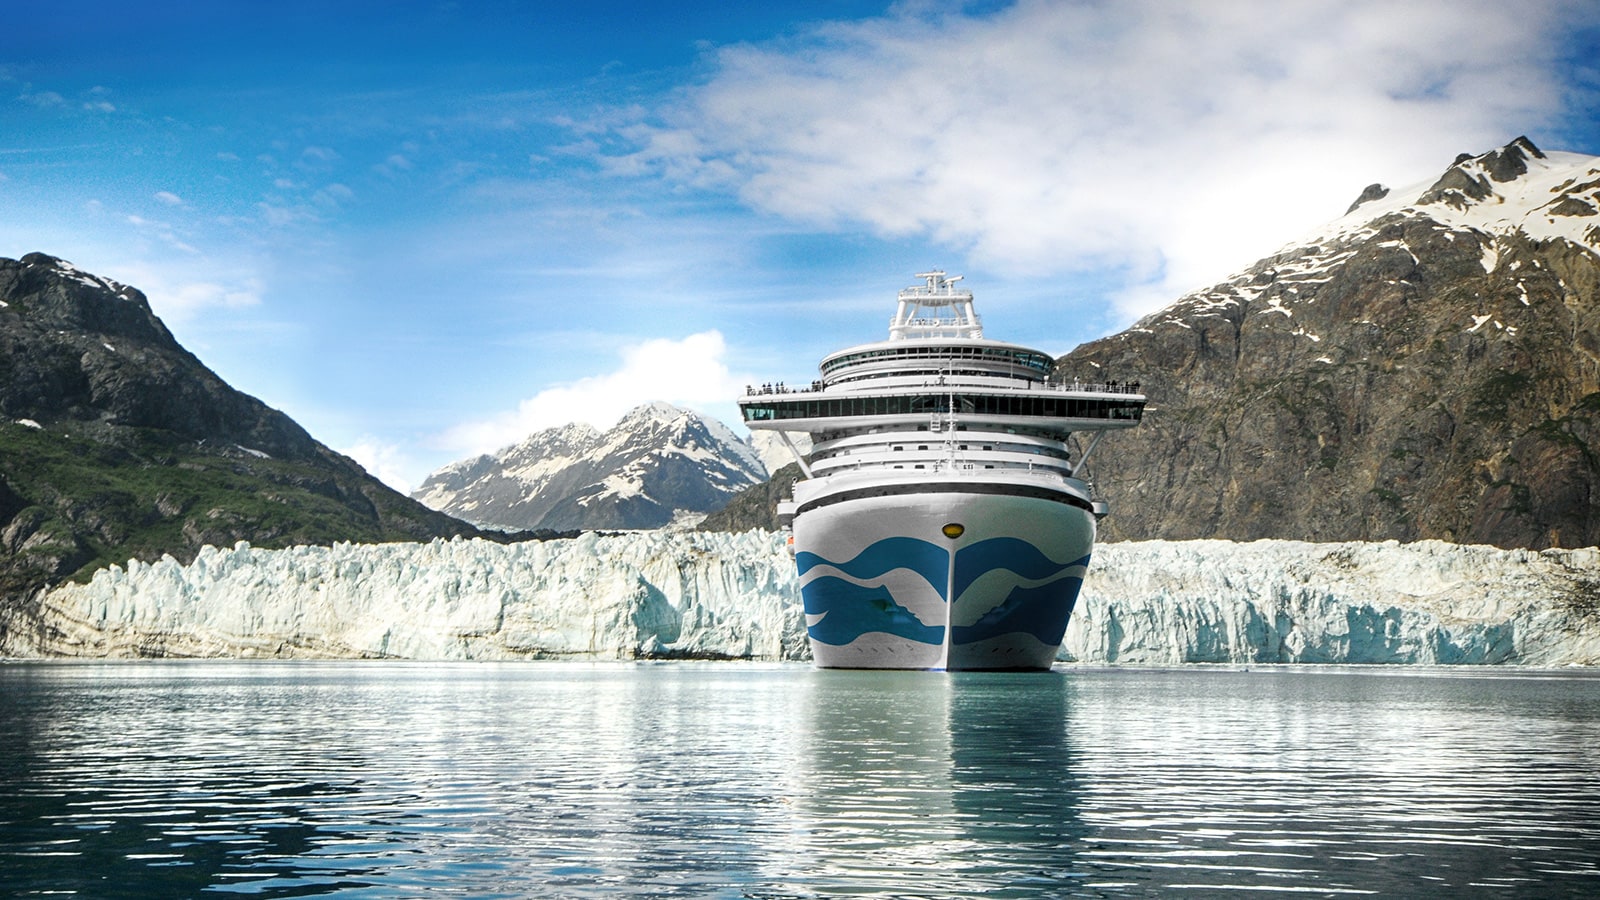 cruise ship on Alaska cruise with Margerie Glacier in the background